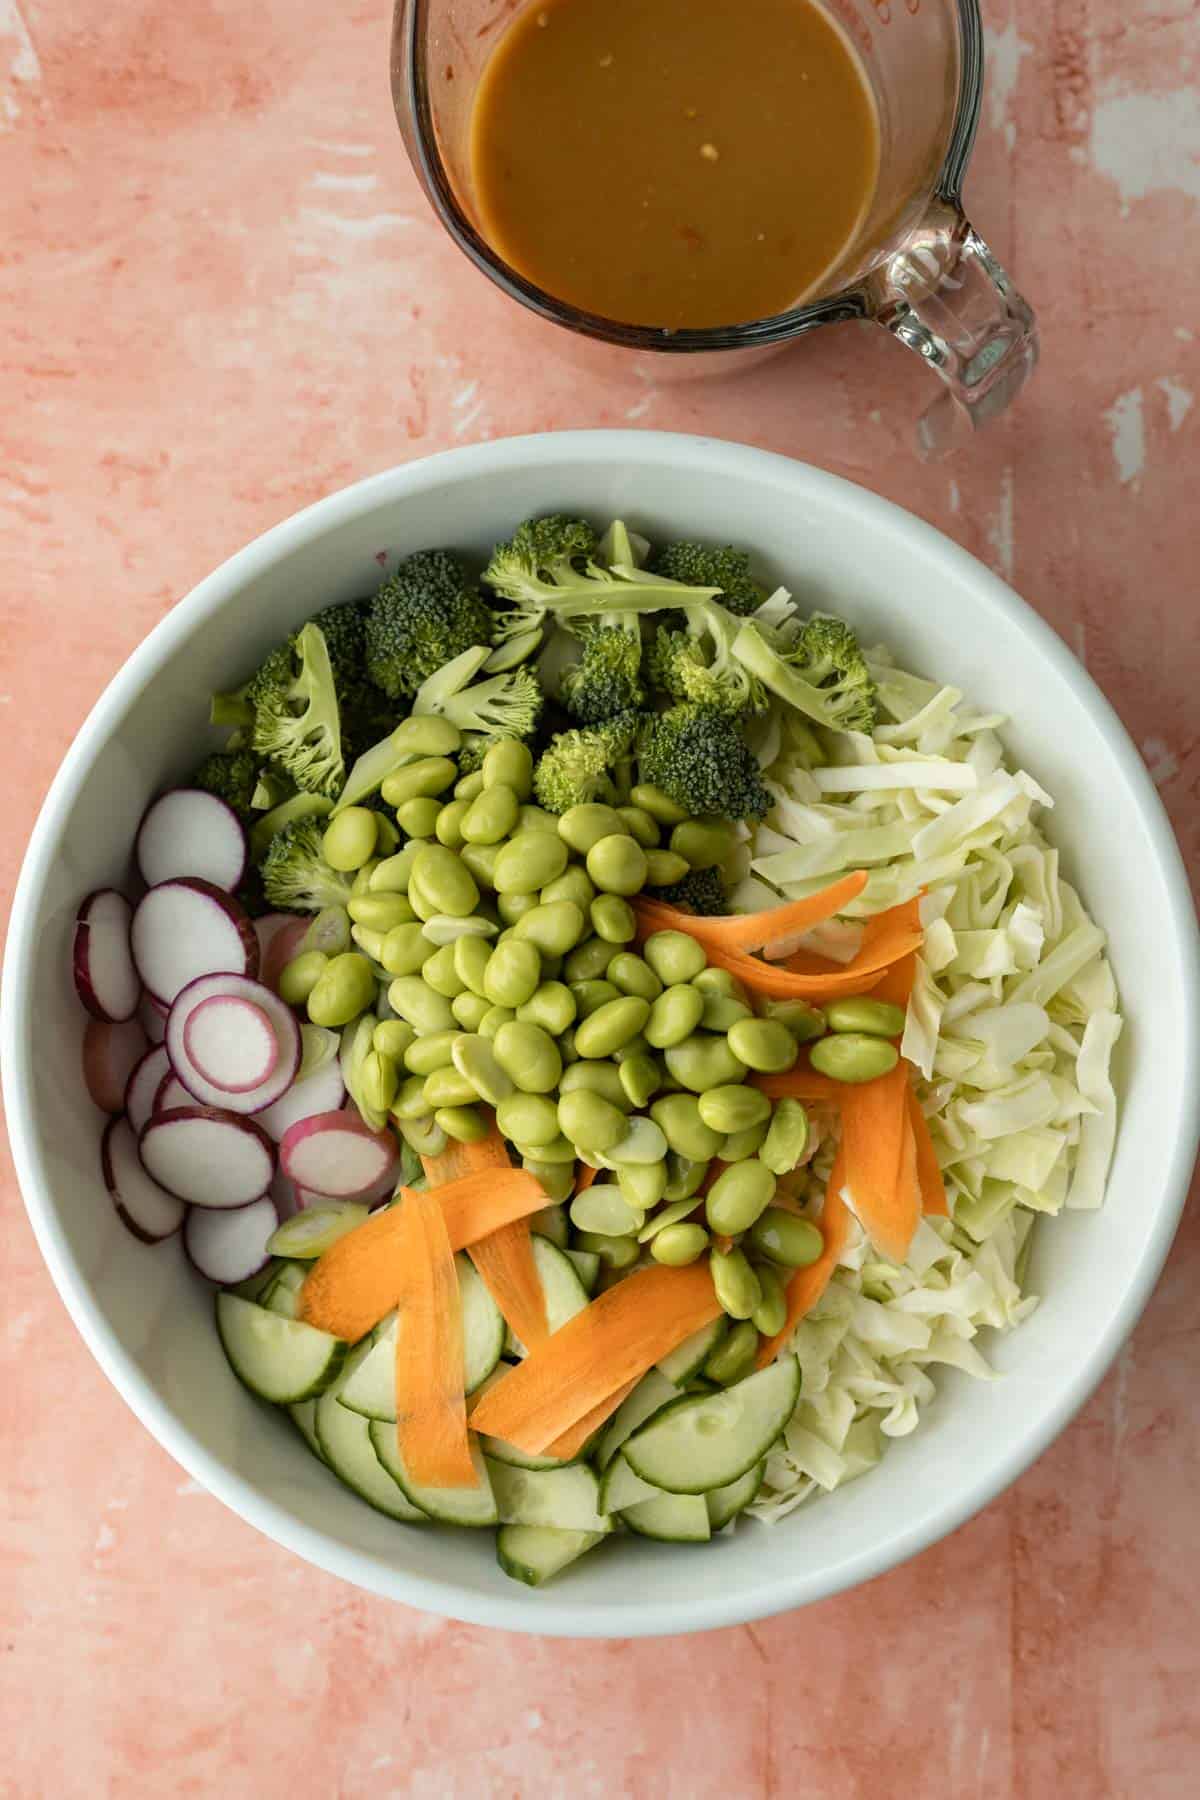 Mixing all of the vegetables together in a large bowl before adding the cooked ramen.